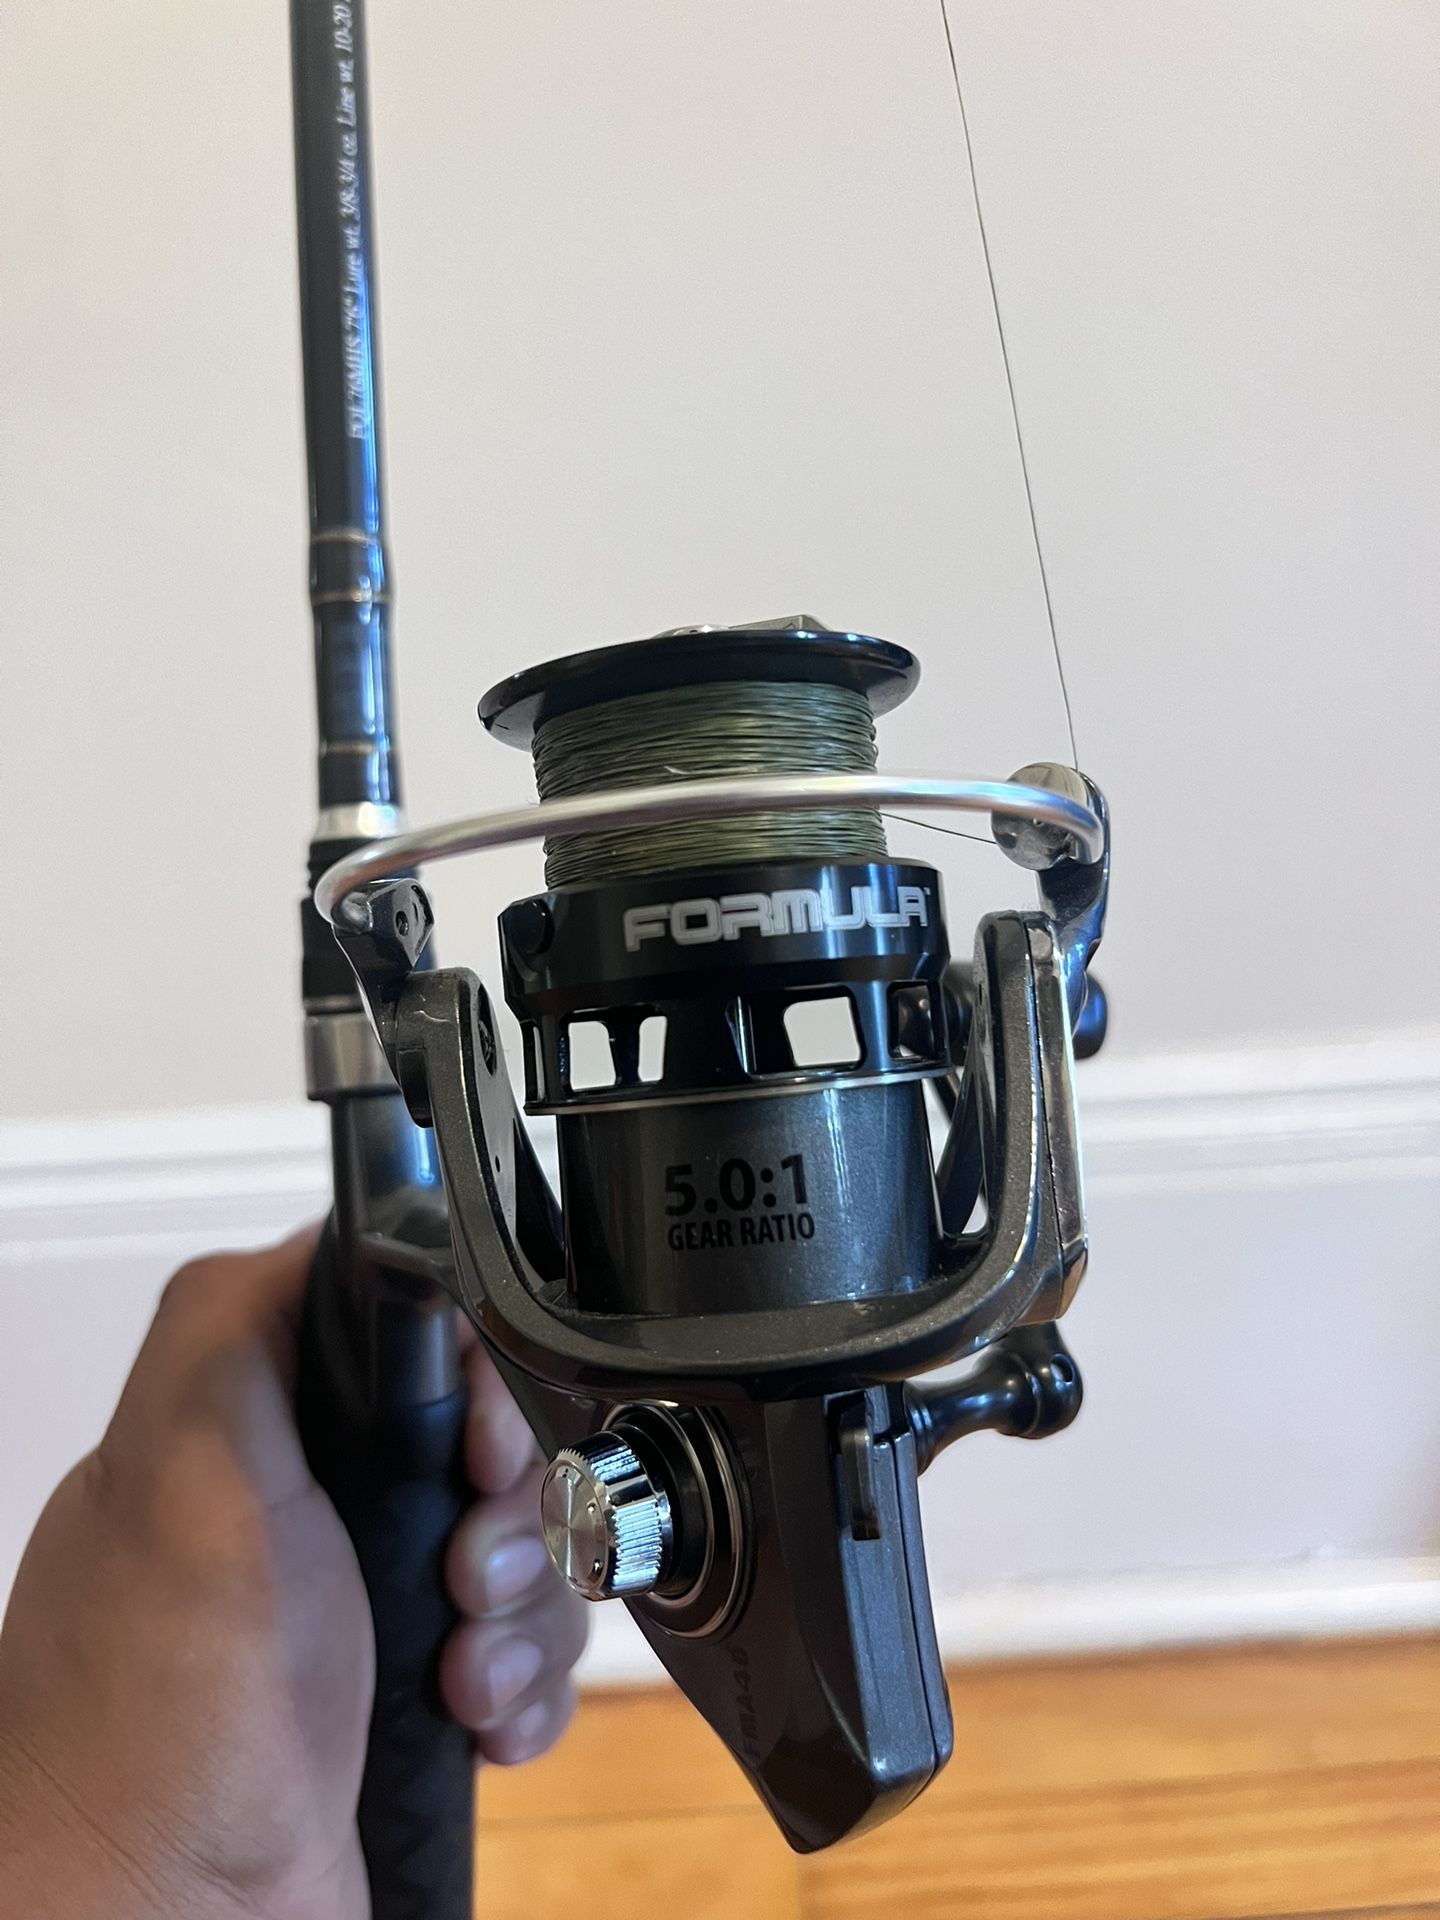 Bass pro Qualifiers 2 Rod With Bass Pro Formula Spinning Reel